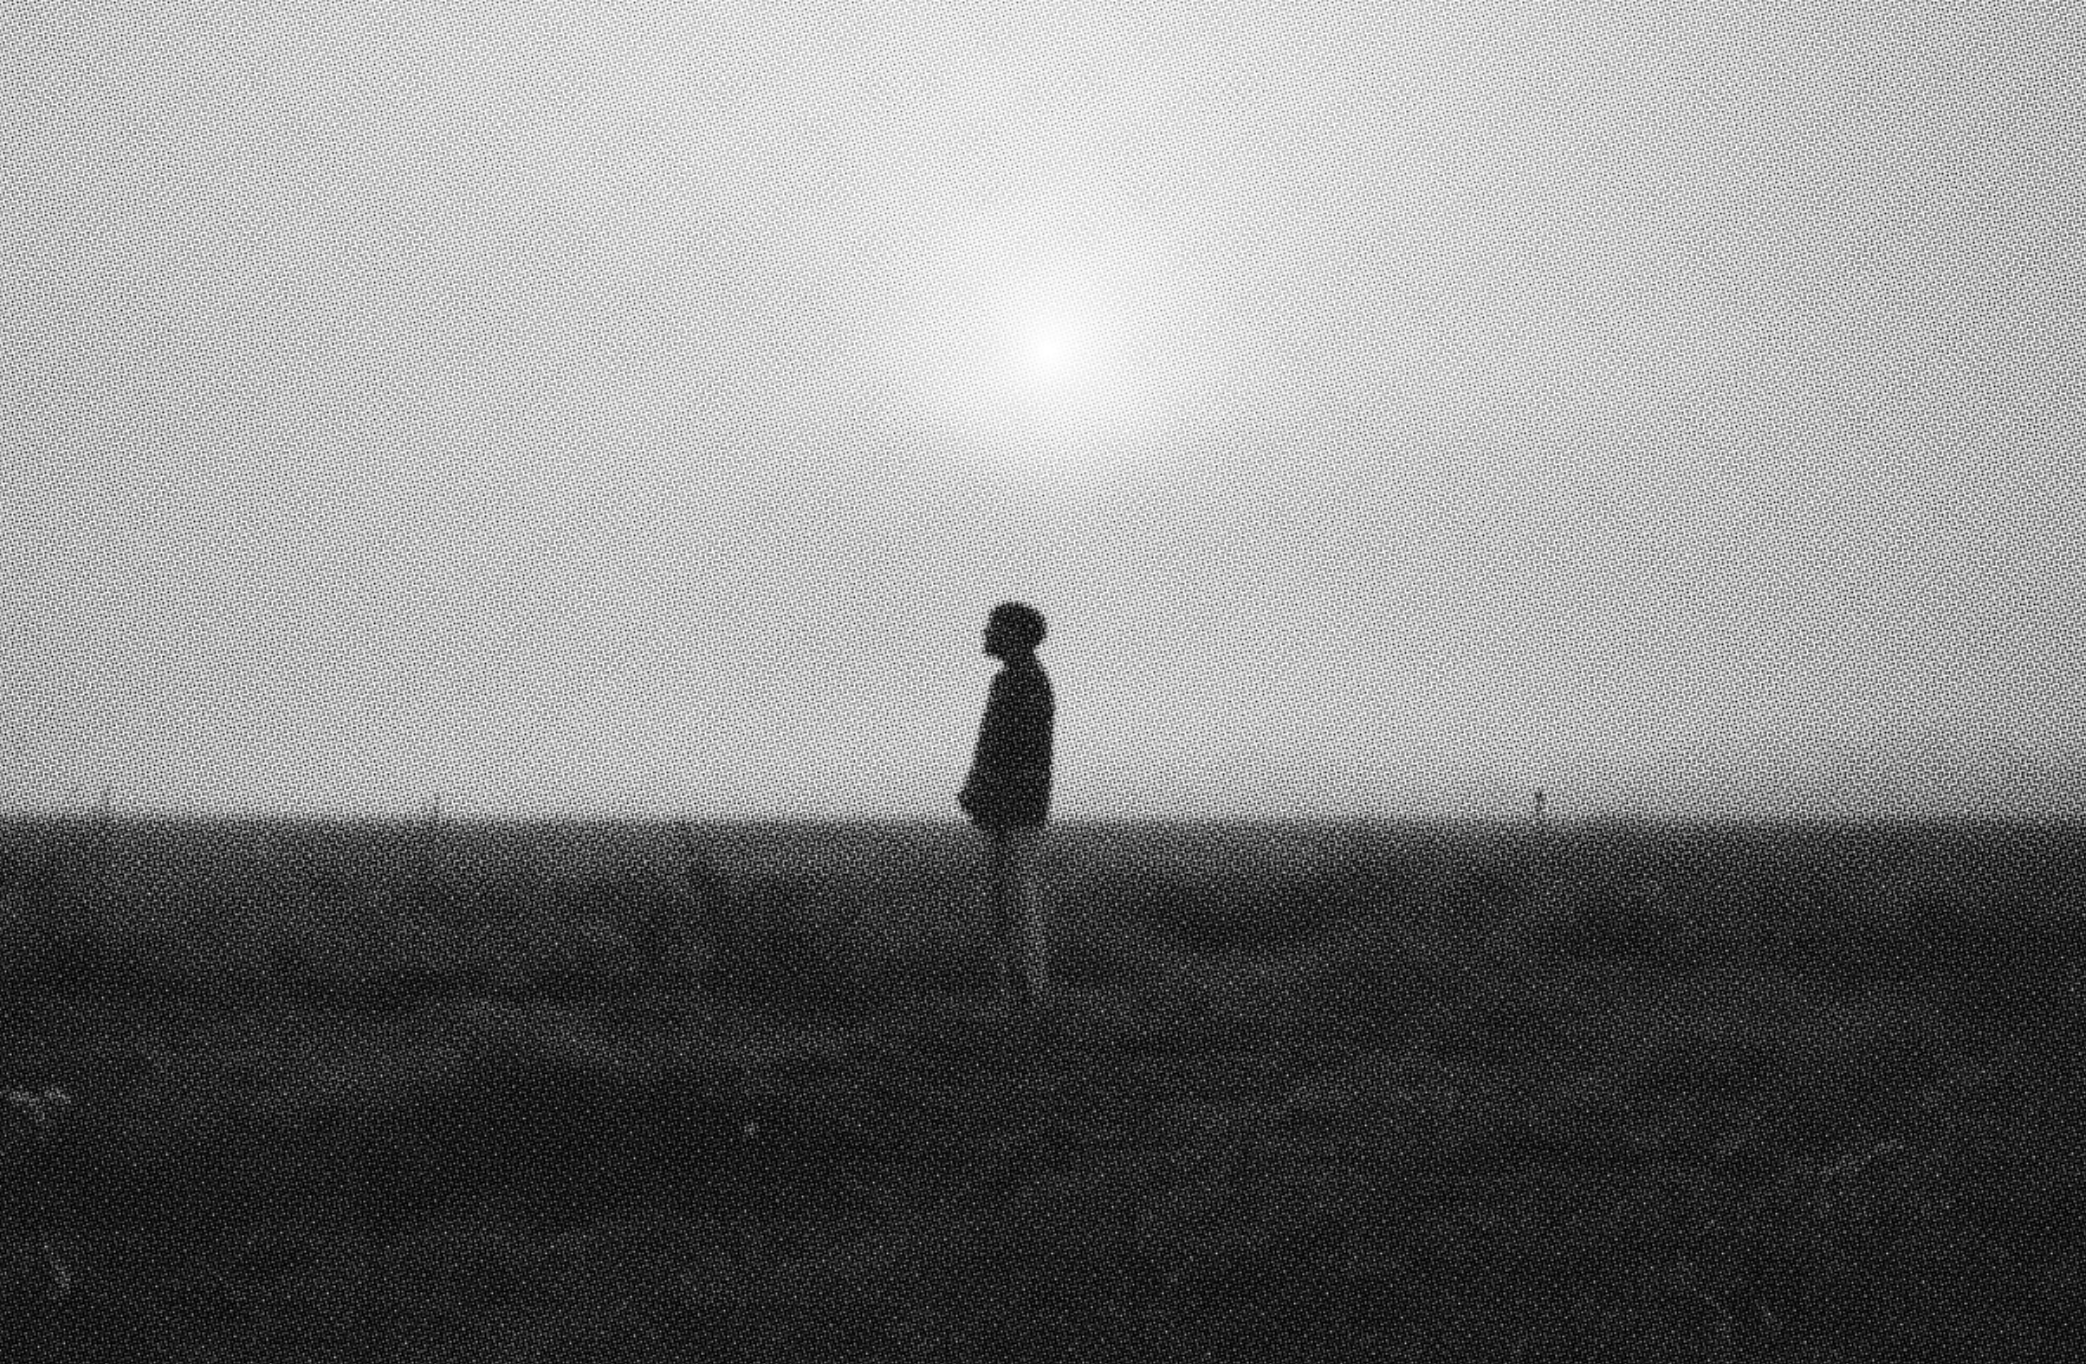 A person stands in alignment with the sun on a bleak, flat landscape. The photo is black and white and has a grainy treatment reminiscinet of vintage film. 